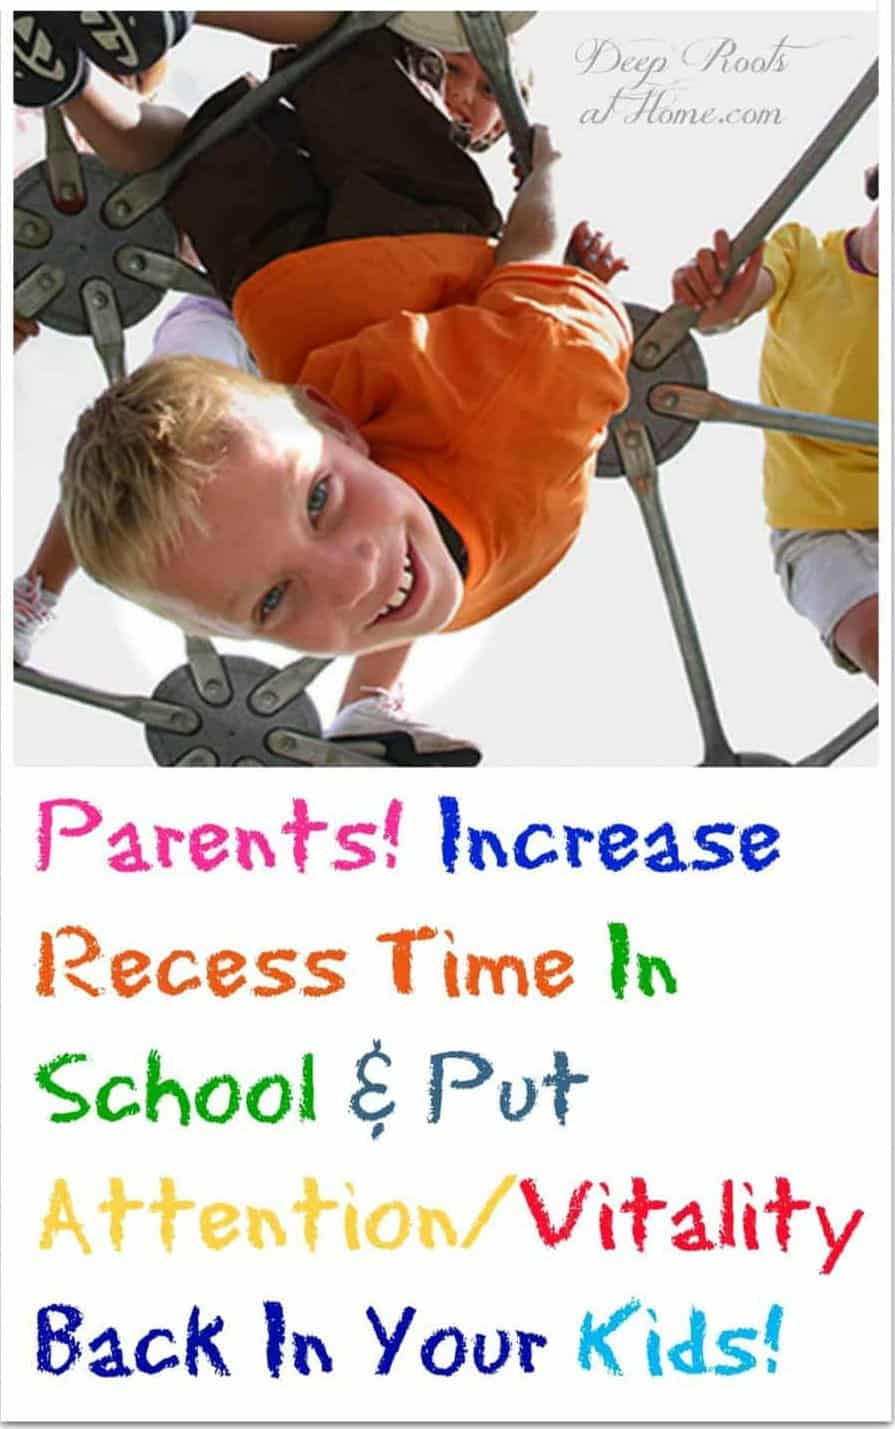 Parents! Increase Recess Time & Put Attention/Vitality Back In the Kids! Kids playing and hanging from a jungle gym.